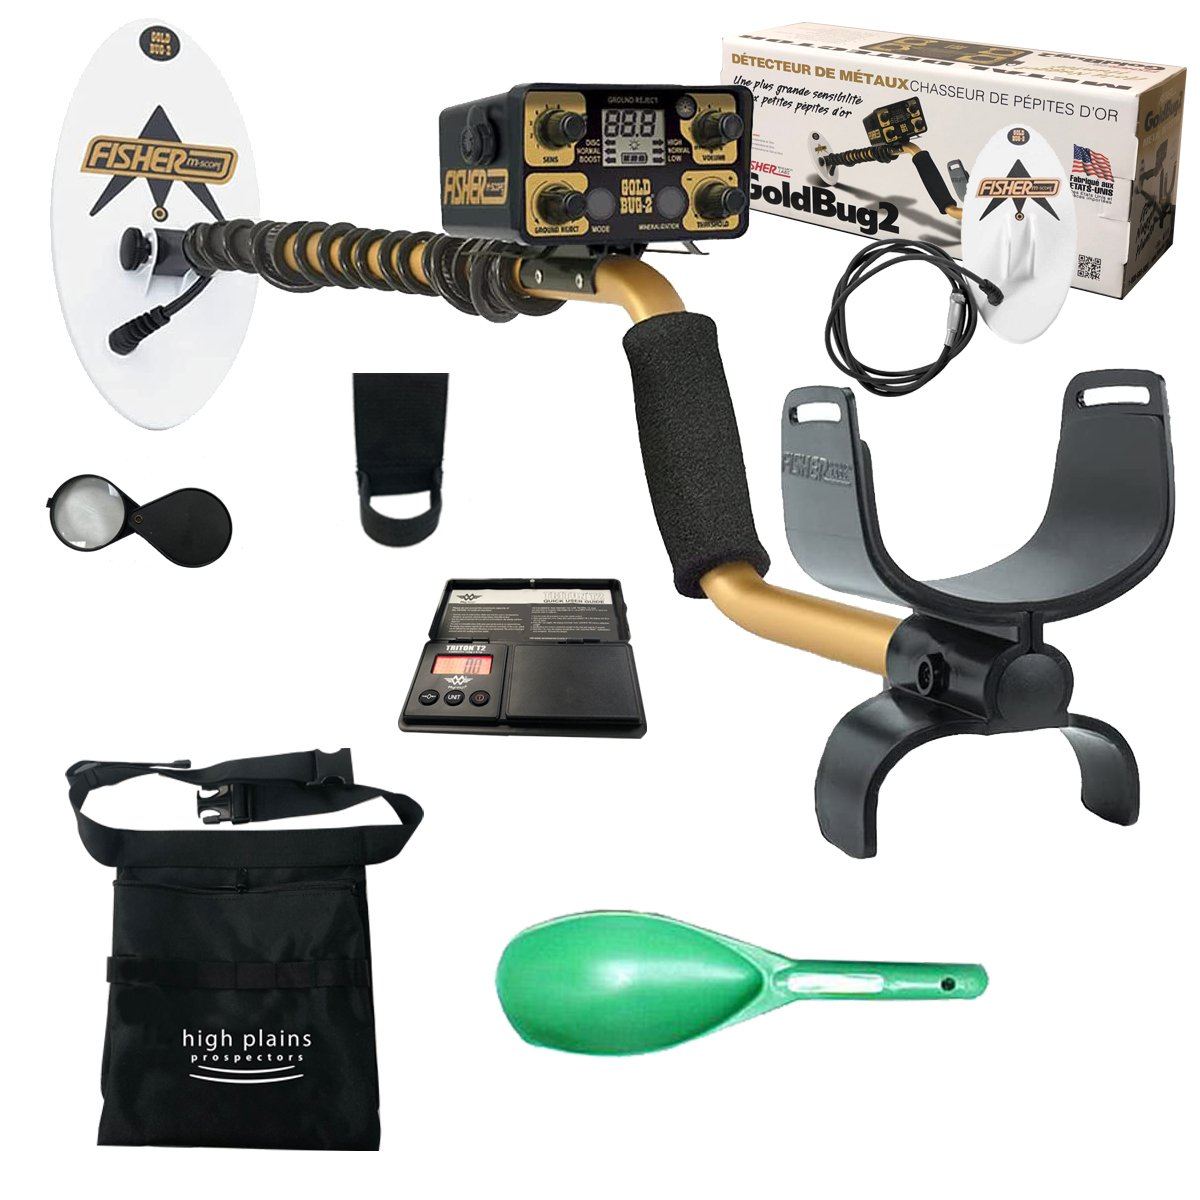 Fisher Gold Bug 2 Combo 6.5" and 10" Coils Bundle with Free Gear